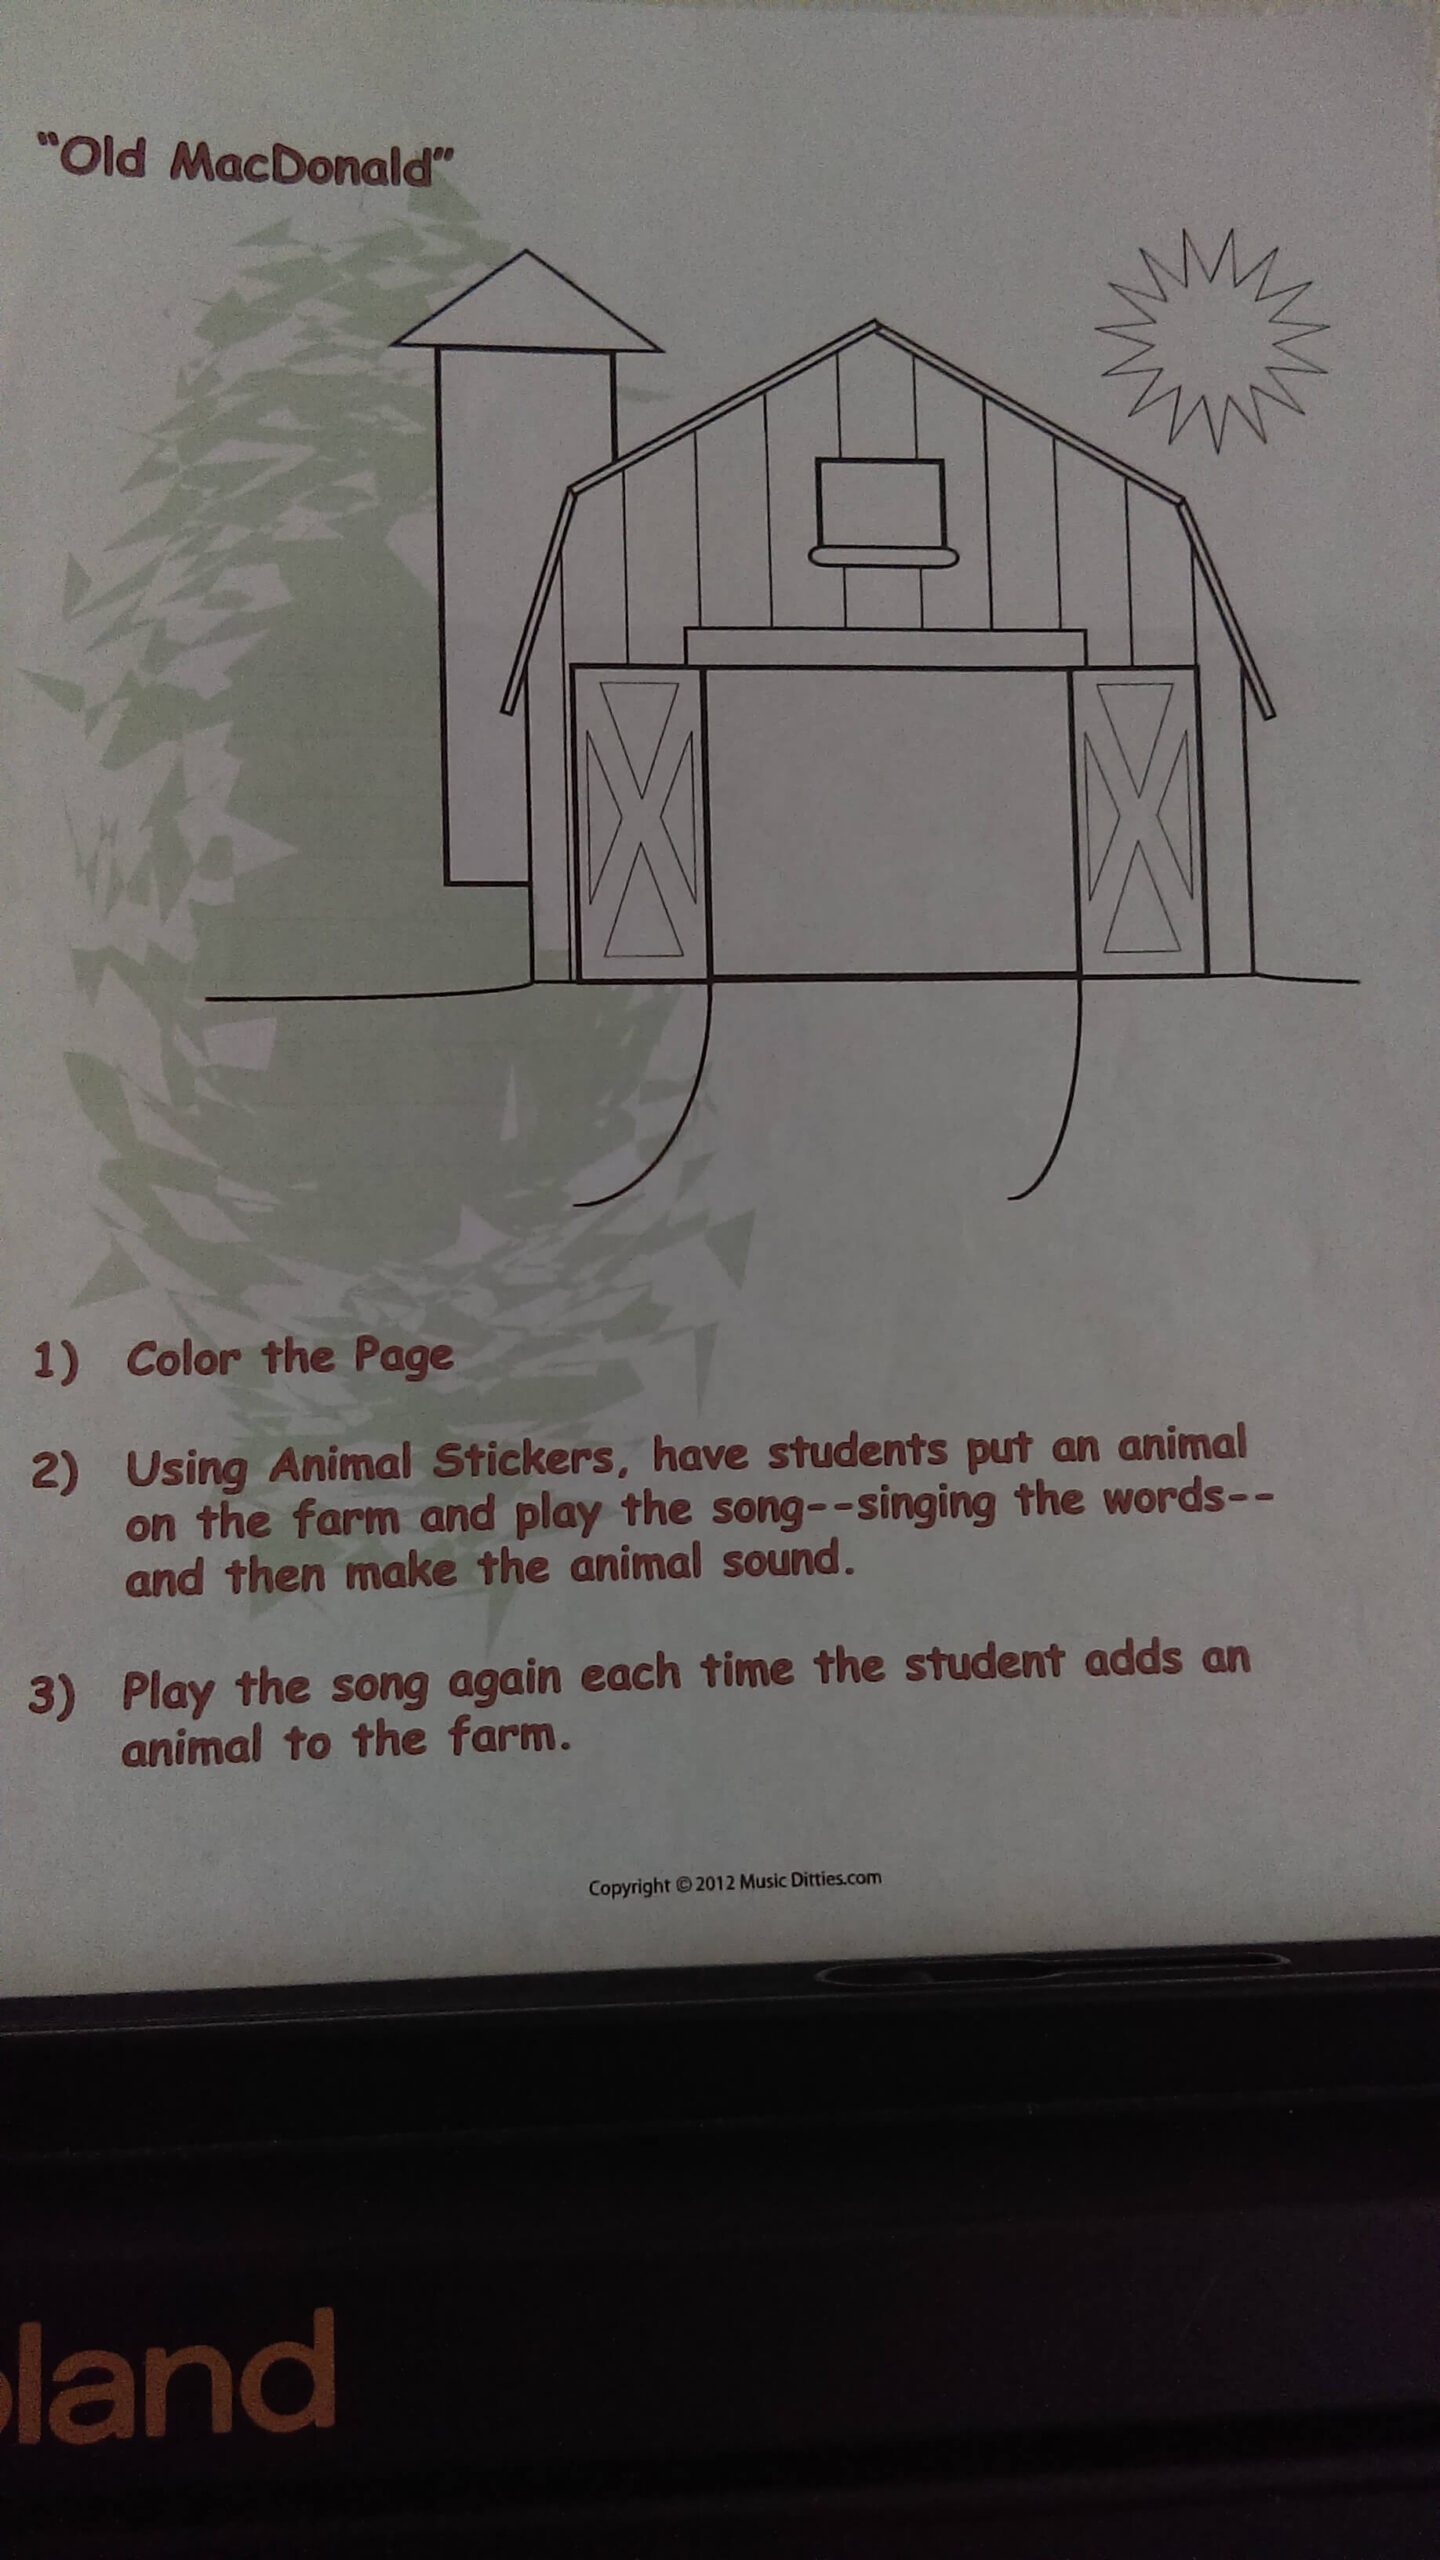 A page of instructions for an animal show.